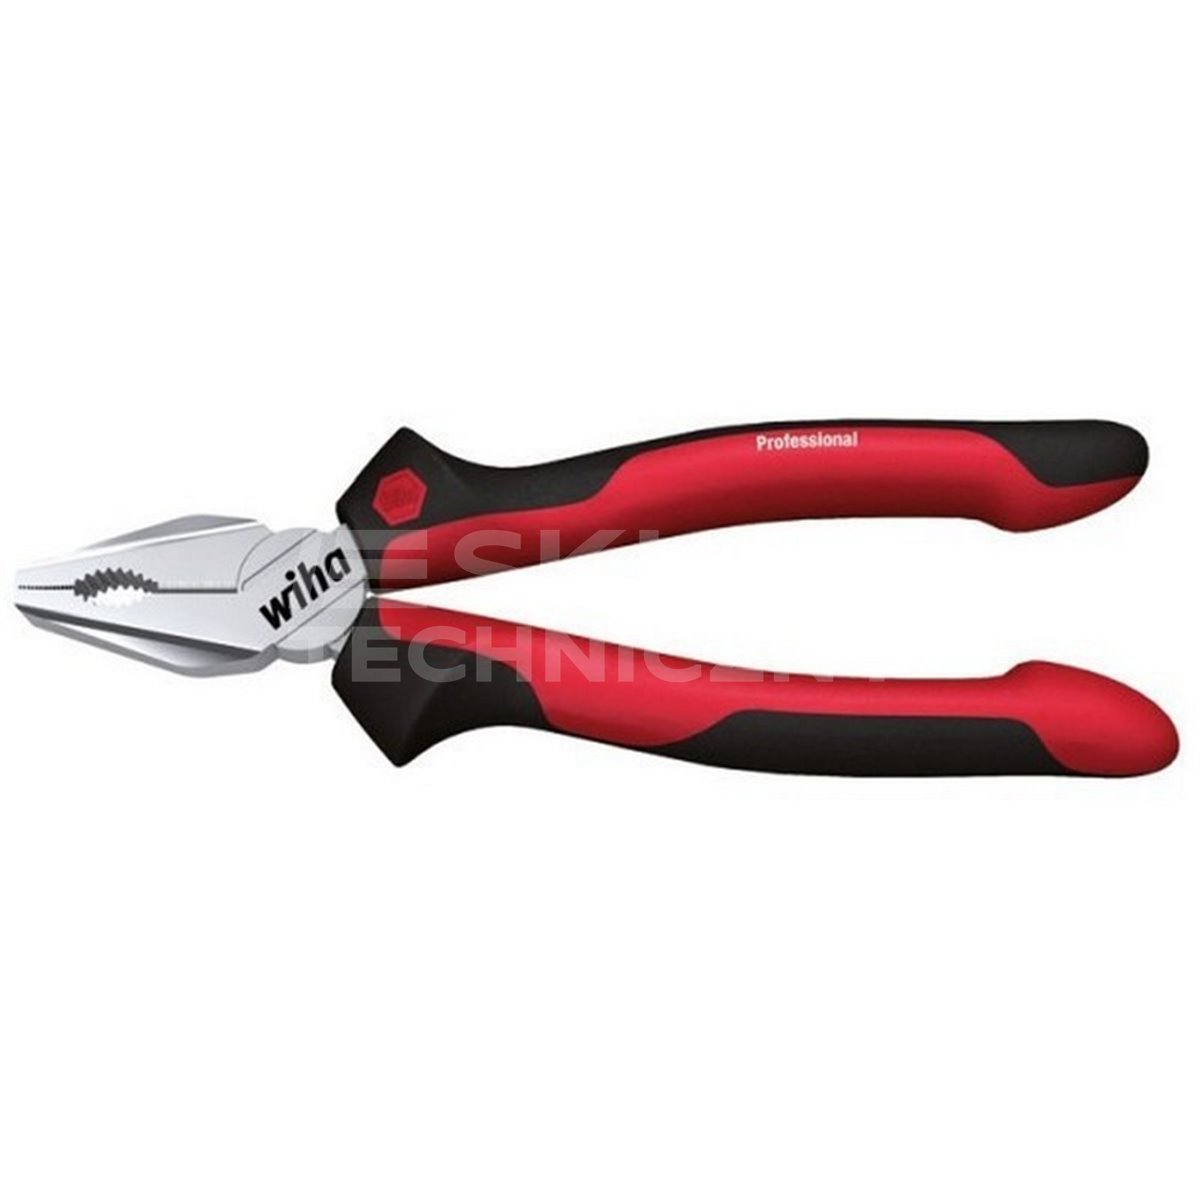 Professional Z01005 180mm combination pliers in a Wiha 27399 blister pack.